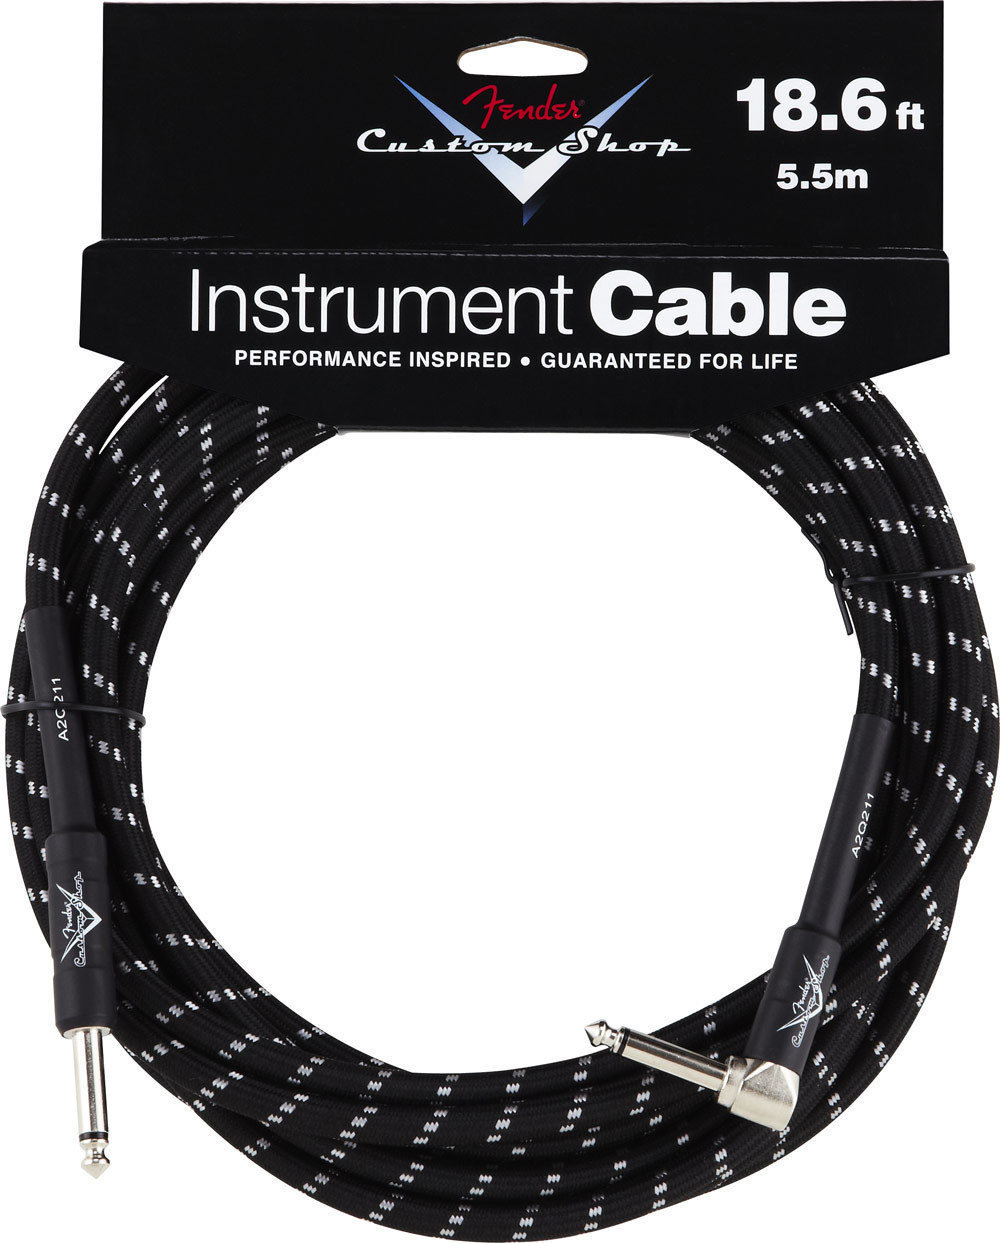 Instrument Cable Fender Custom Shop Performance Series Cable 5.5m Black Tweed Angled